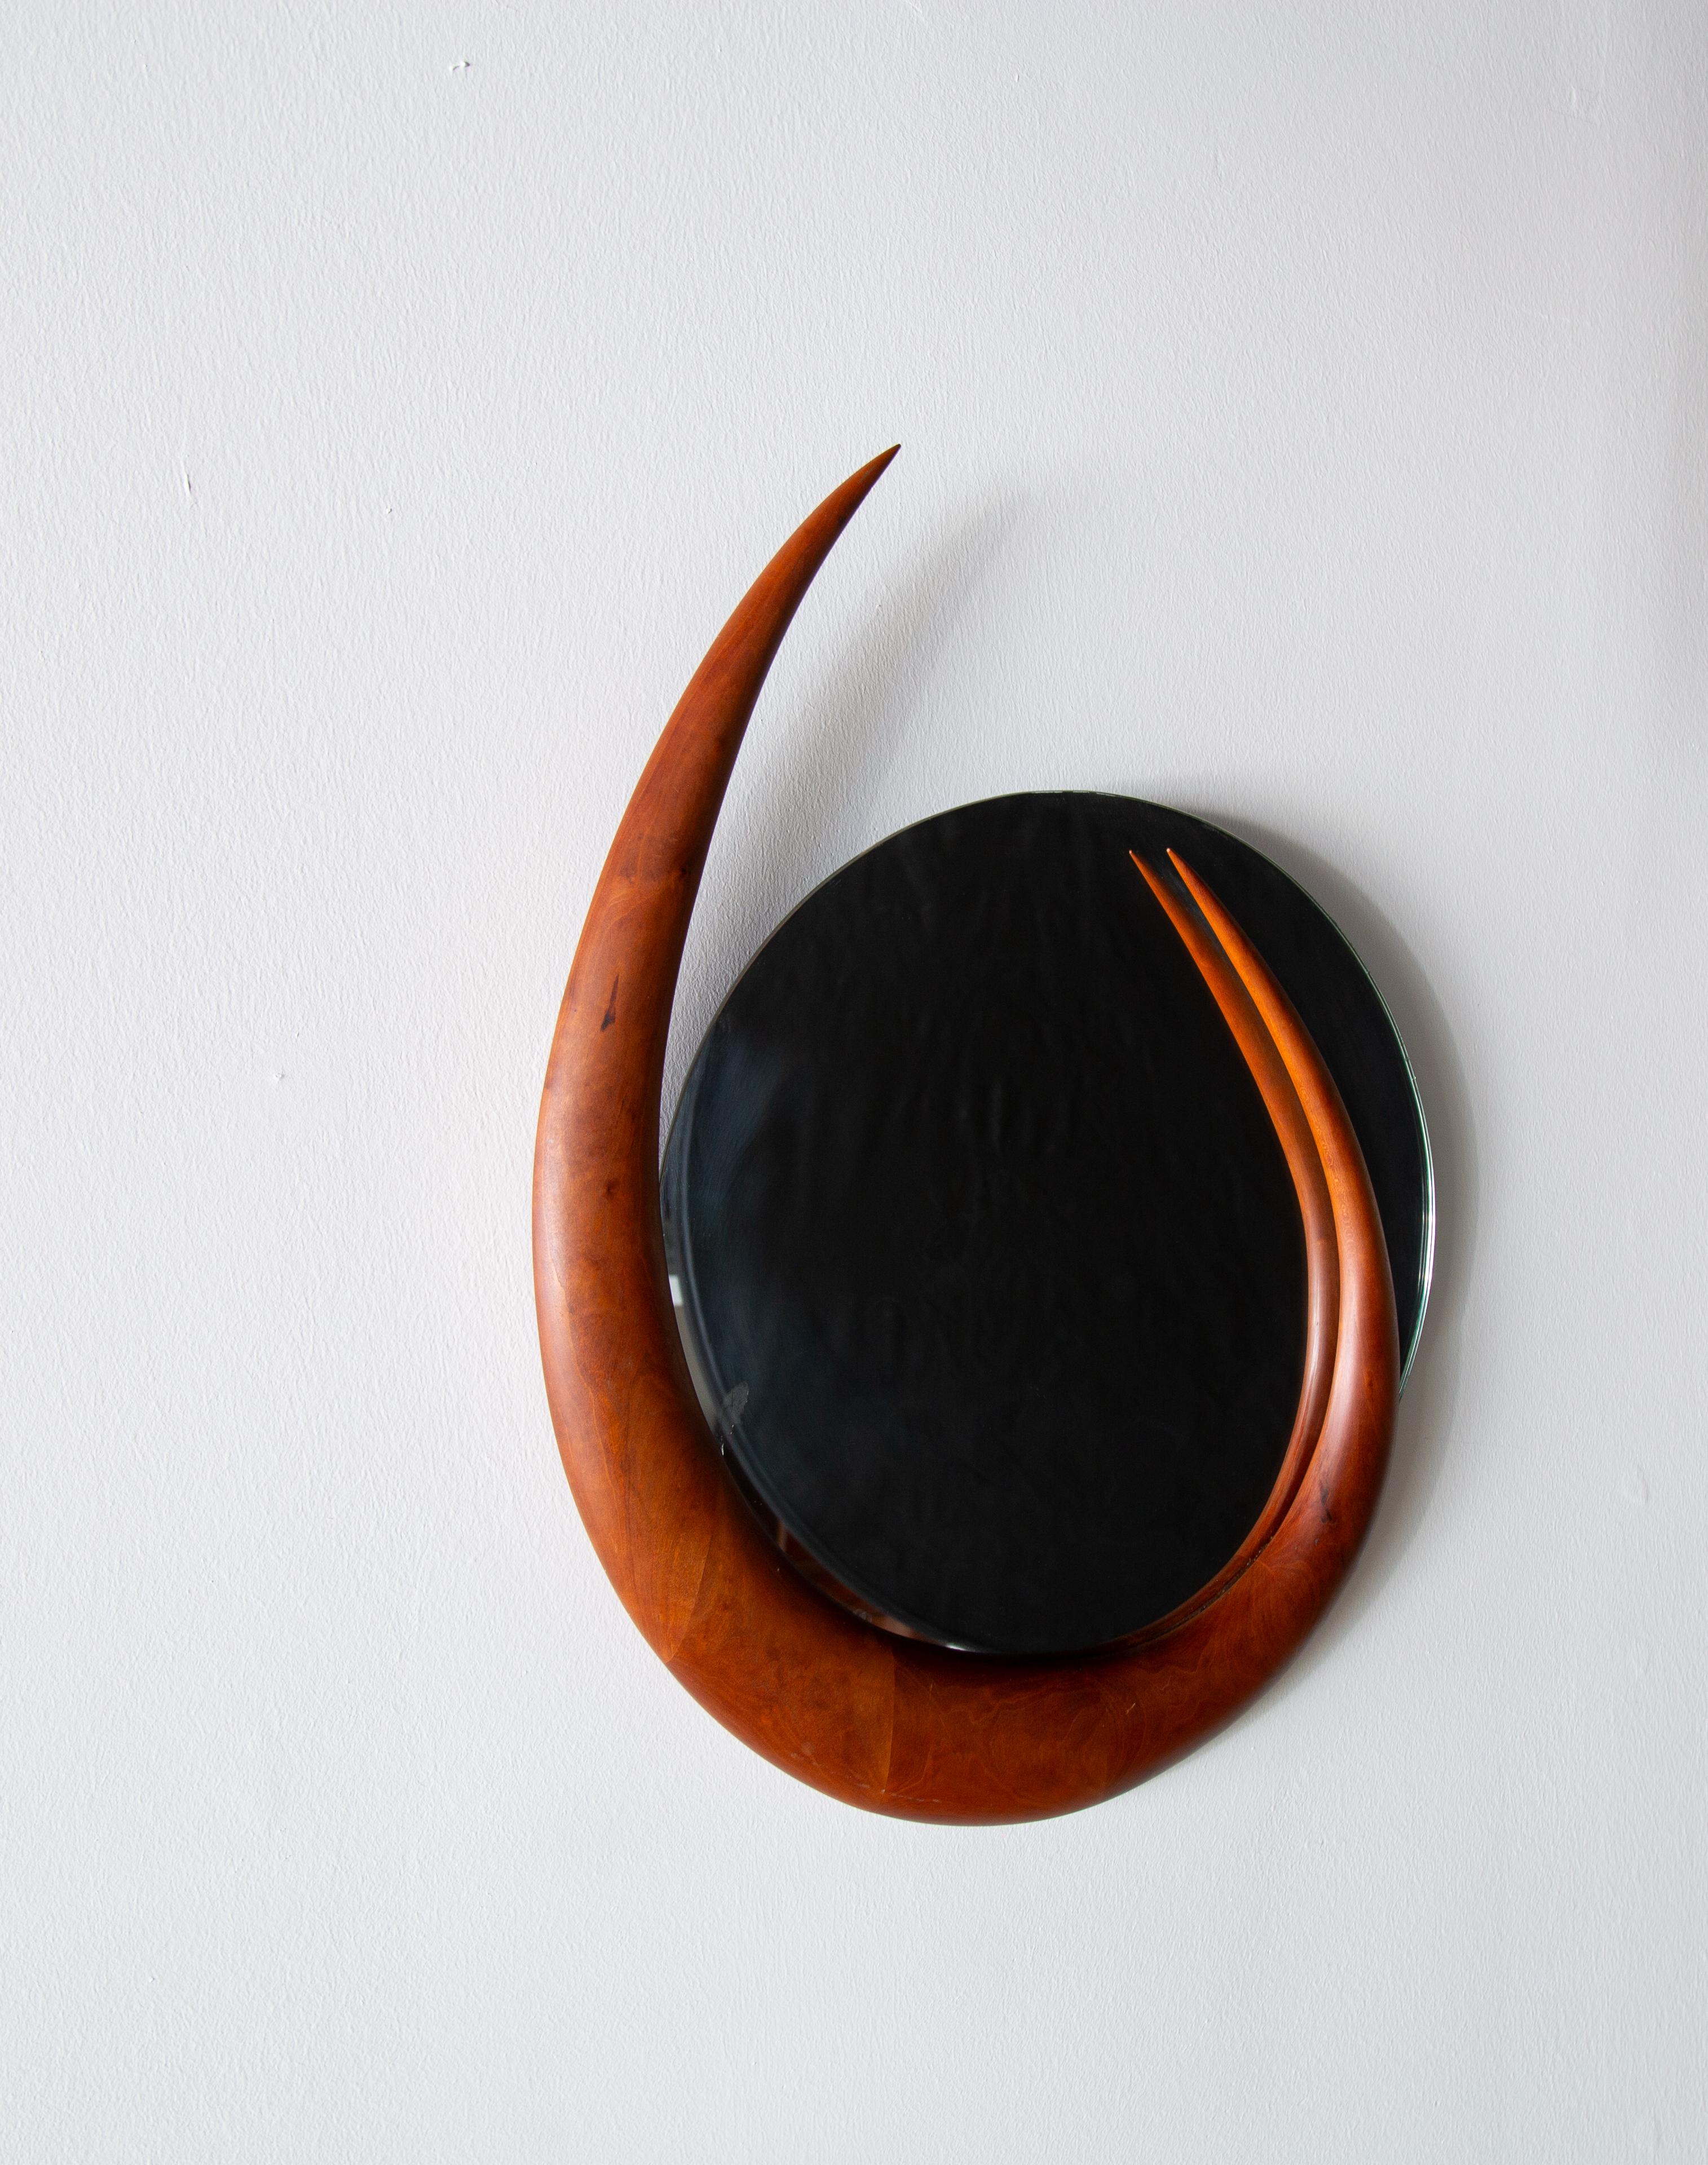 A studio craft Mirror by Kellams in solid hand carved walnut. Signed and dated 1992. A sculptural frame set off of a thin round mirror gives a floating allusion. Well constructed in the manner of Wendell Castle. 

Dimensions:

Mirror is 18”